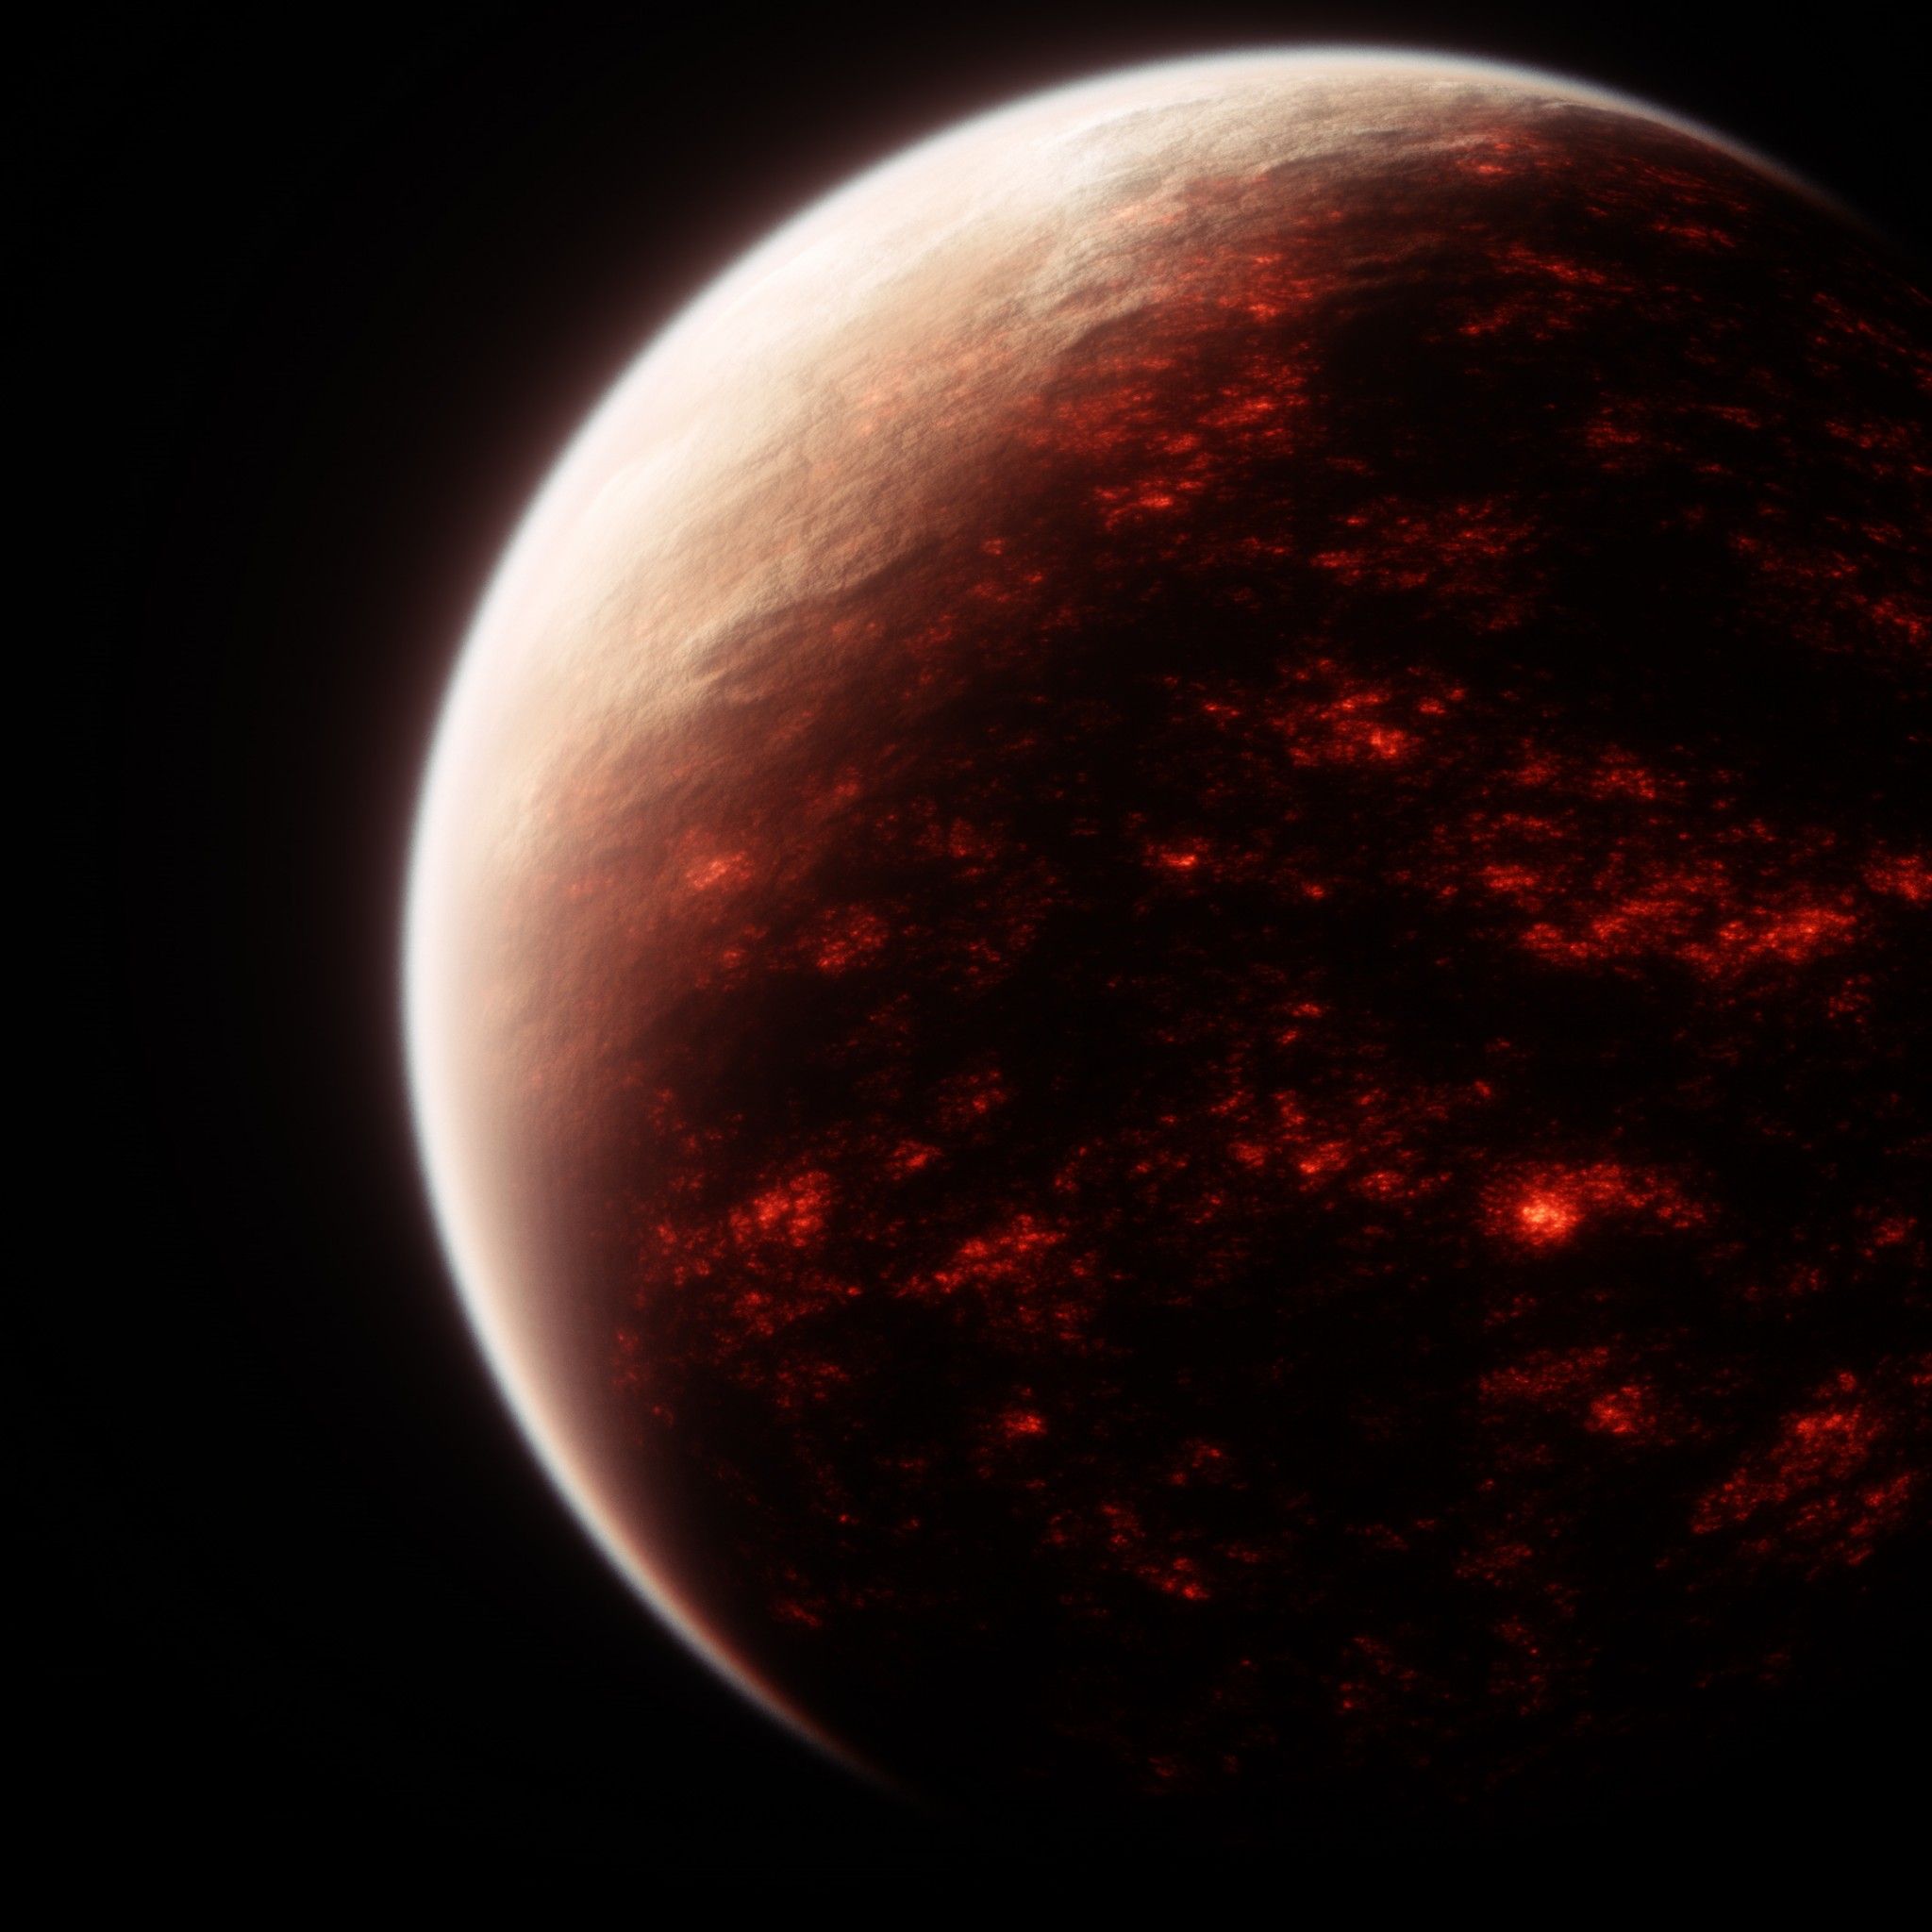 Red planet 4K Wallpaper, Burning, Space exploration, Dark background, Space